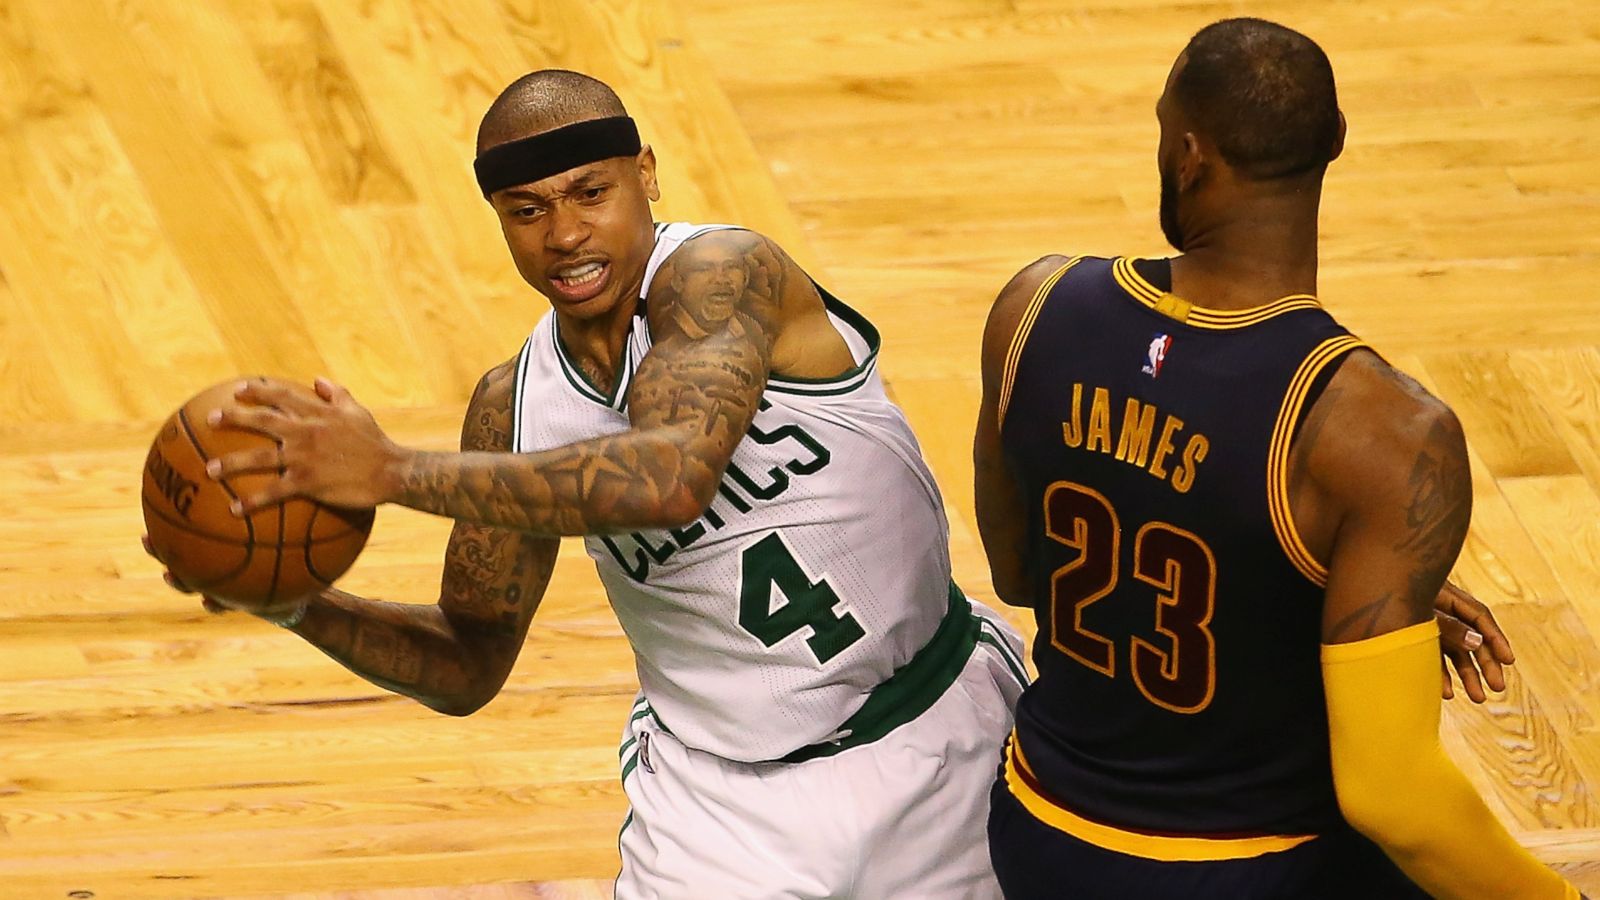 Isaiah Thomas misses showboat dunk, so he turns it into a three - NBC Sports